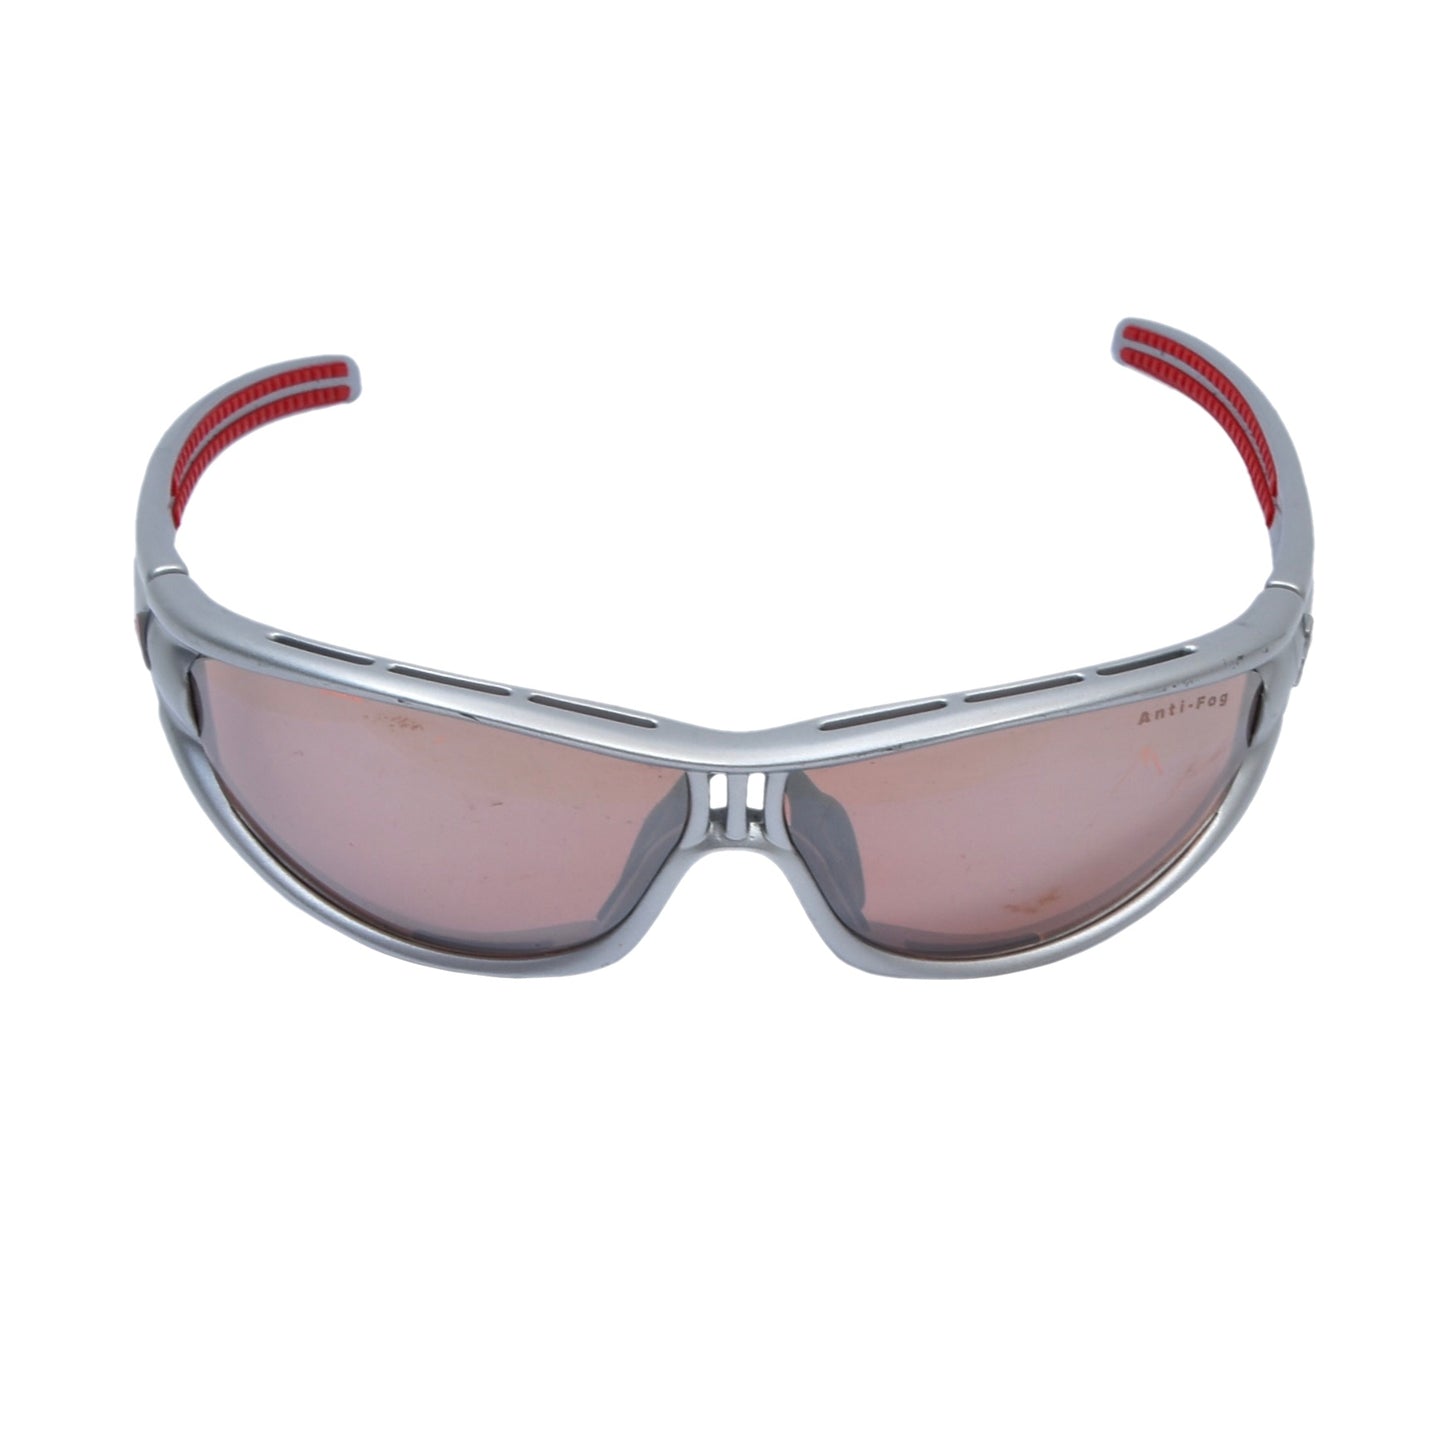 Adidas A135 6050 Evil Eye Sunglasses Size S - Grey/Silver & Red